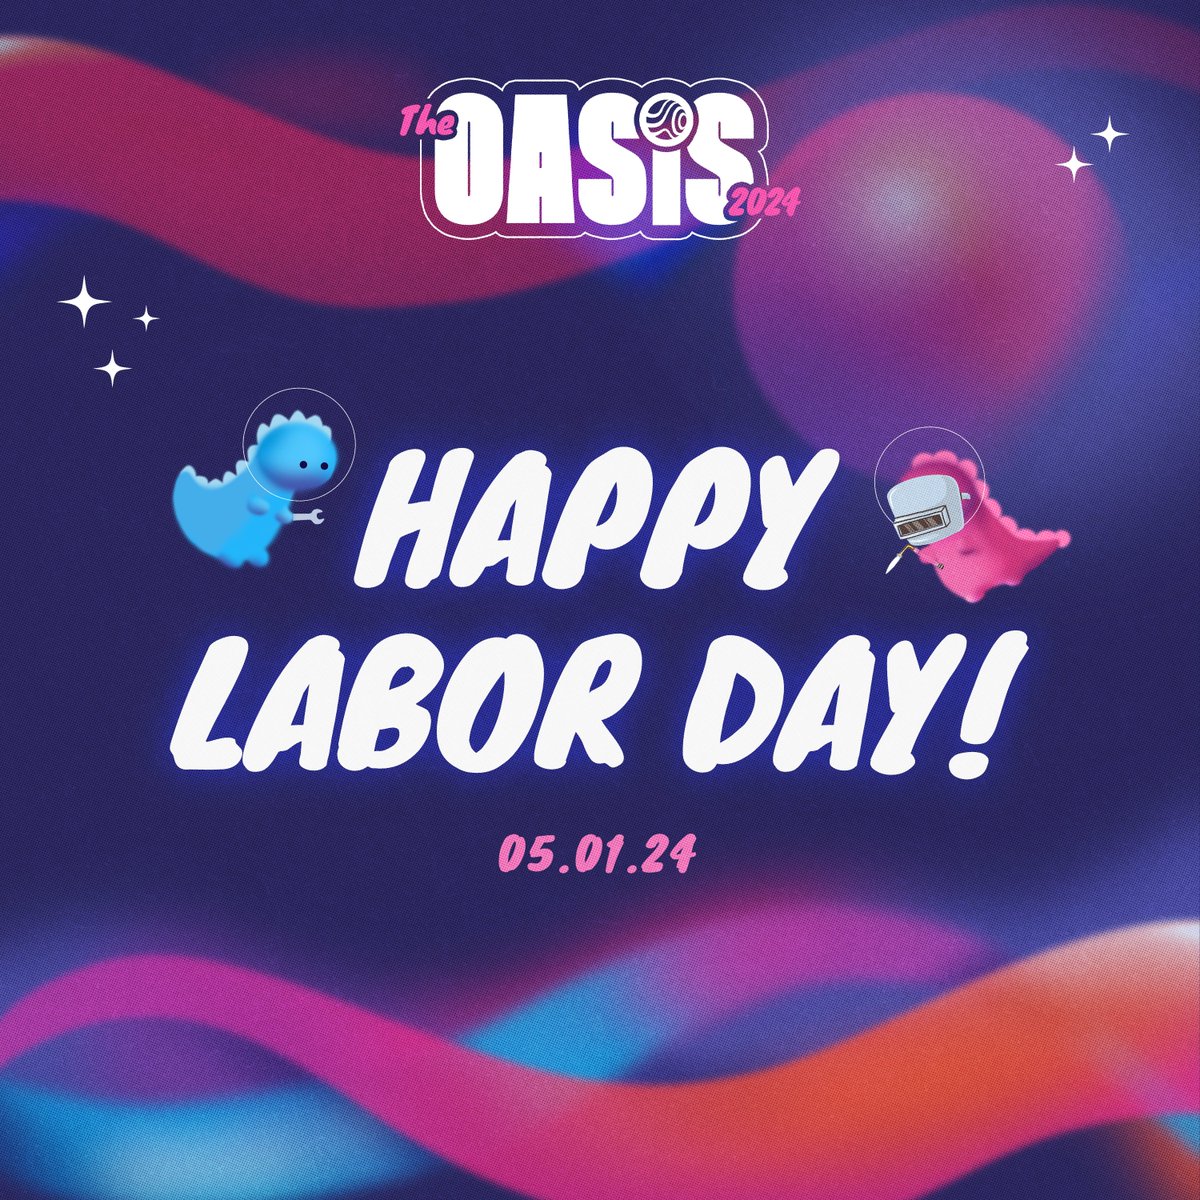 Lets all give a warm greeting to our amazing dino workers today. Happy Labor Day!

#TheOASIS2024 #SinceDayOne